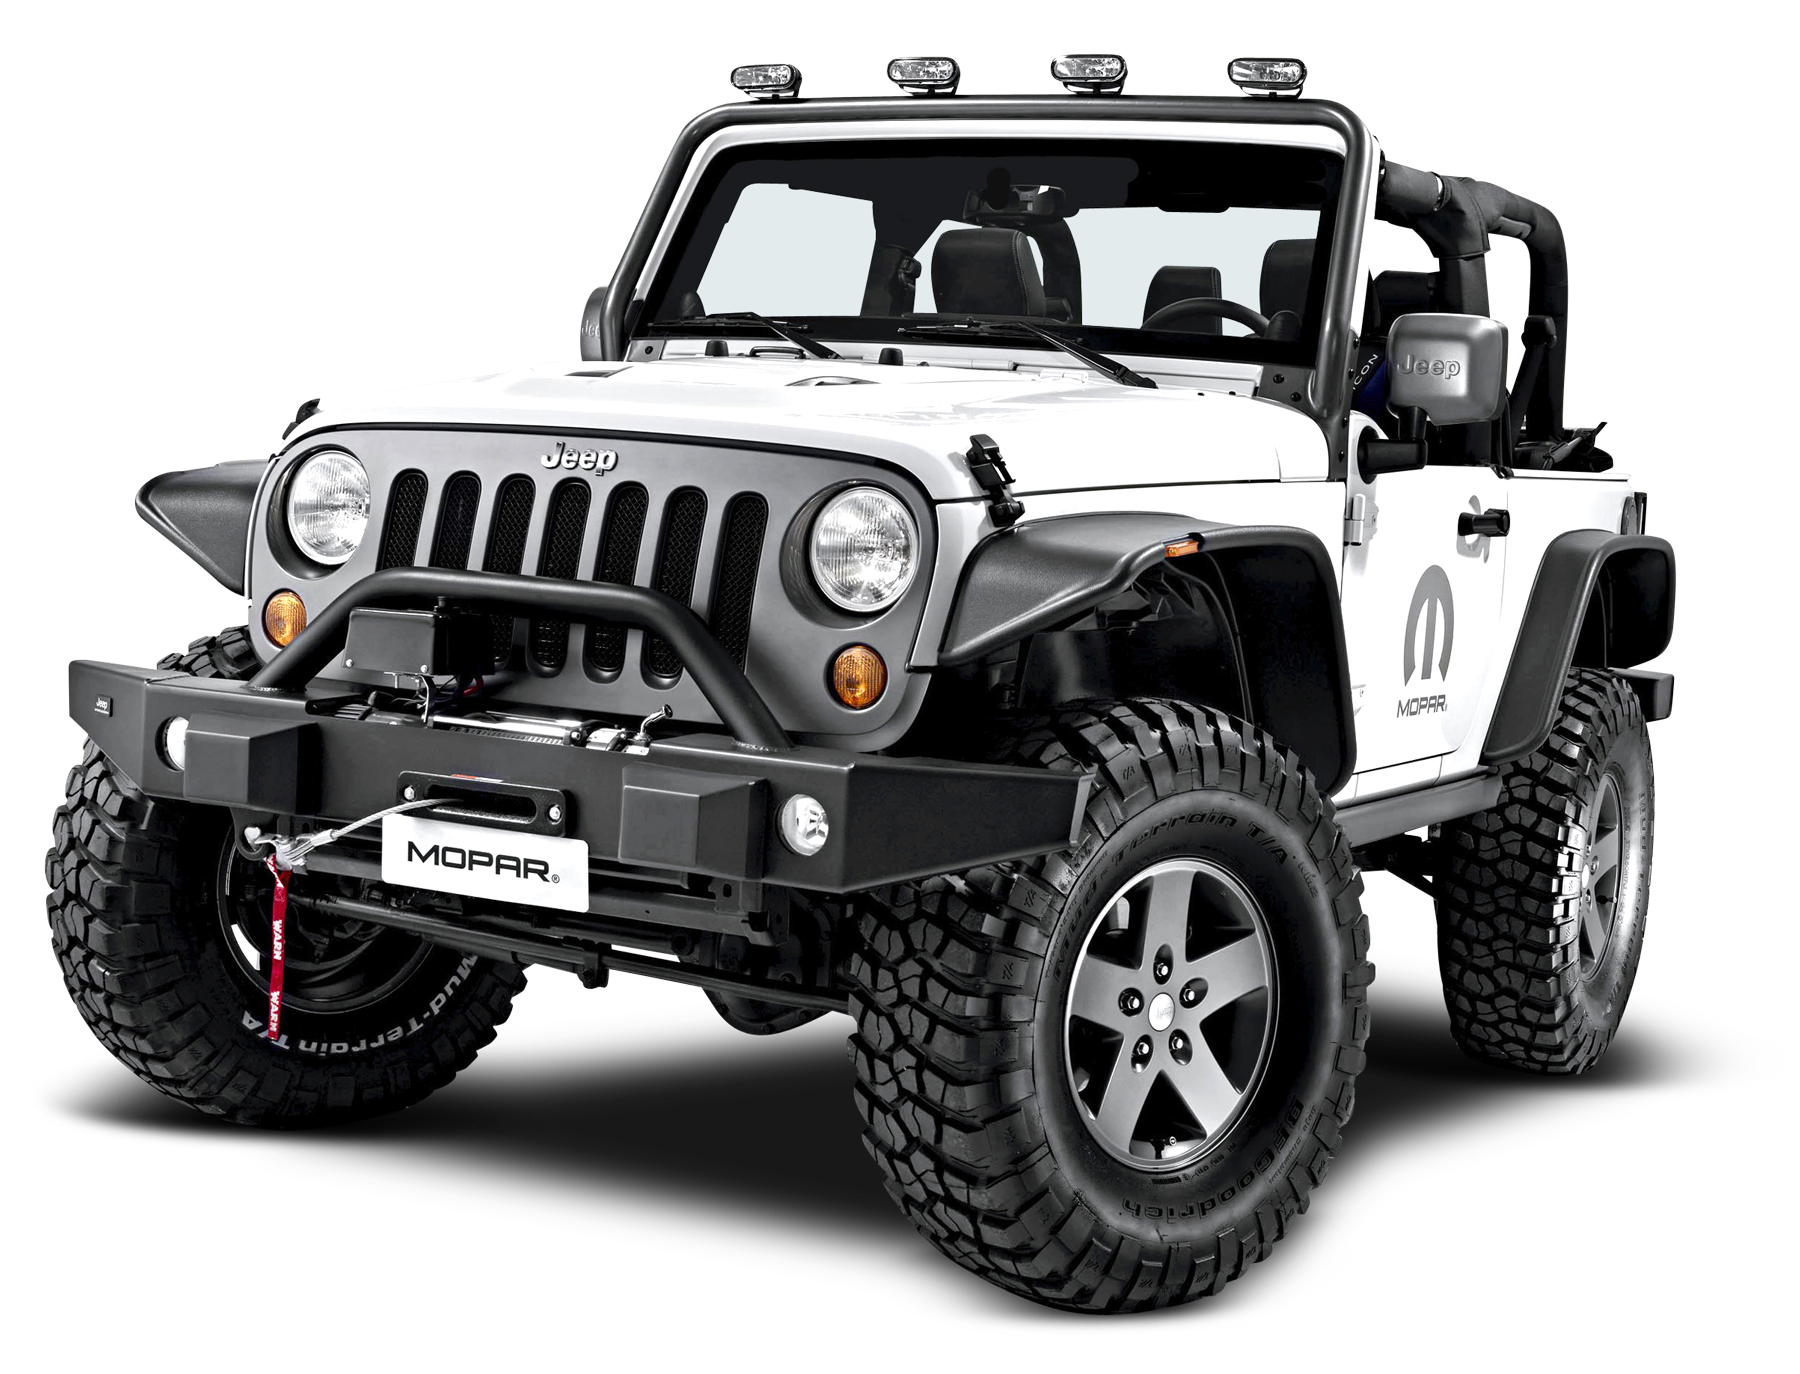 jeep clipart jeep wrangler jeep jeep wrangler transparent free for download on webstockreview 2020 jeep clipart jeep wrangler jeep jeep